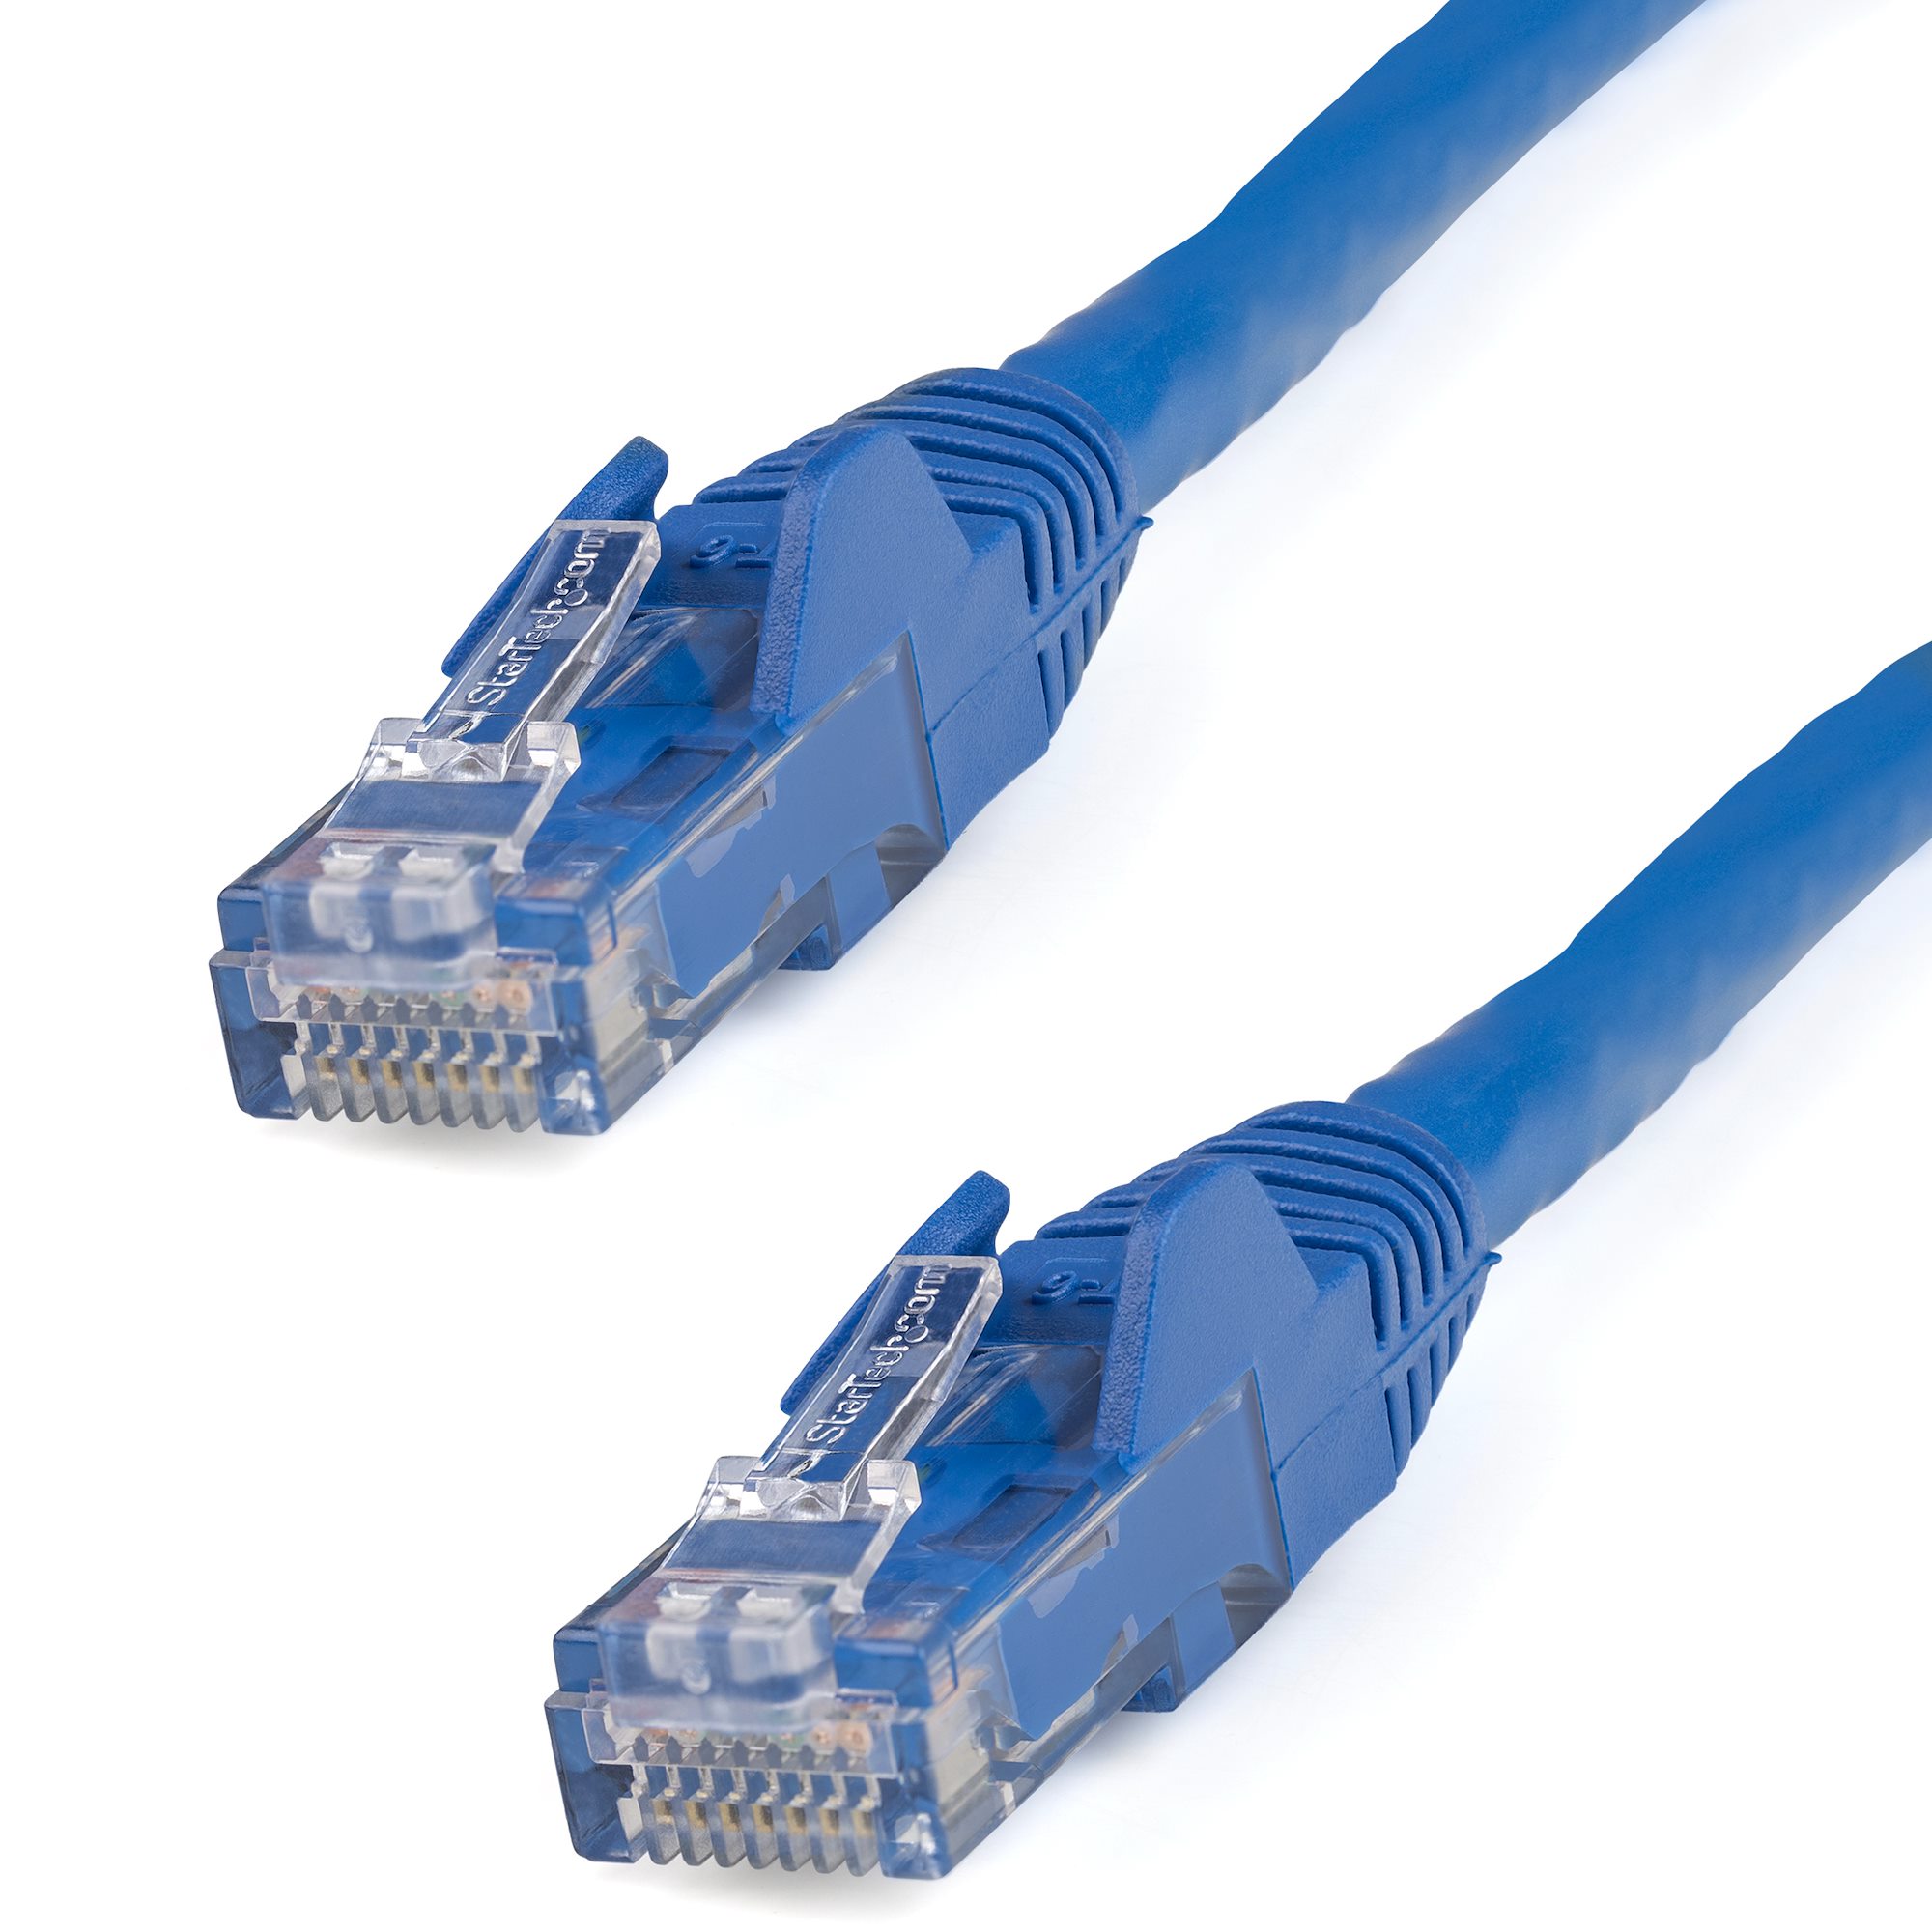 5 Blue CAT6 Snagless UTP Patch Cord